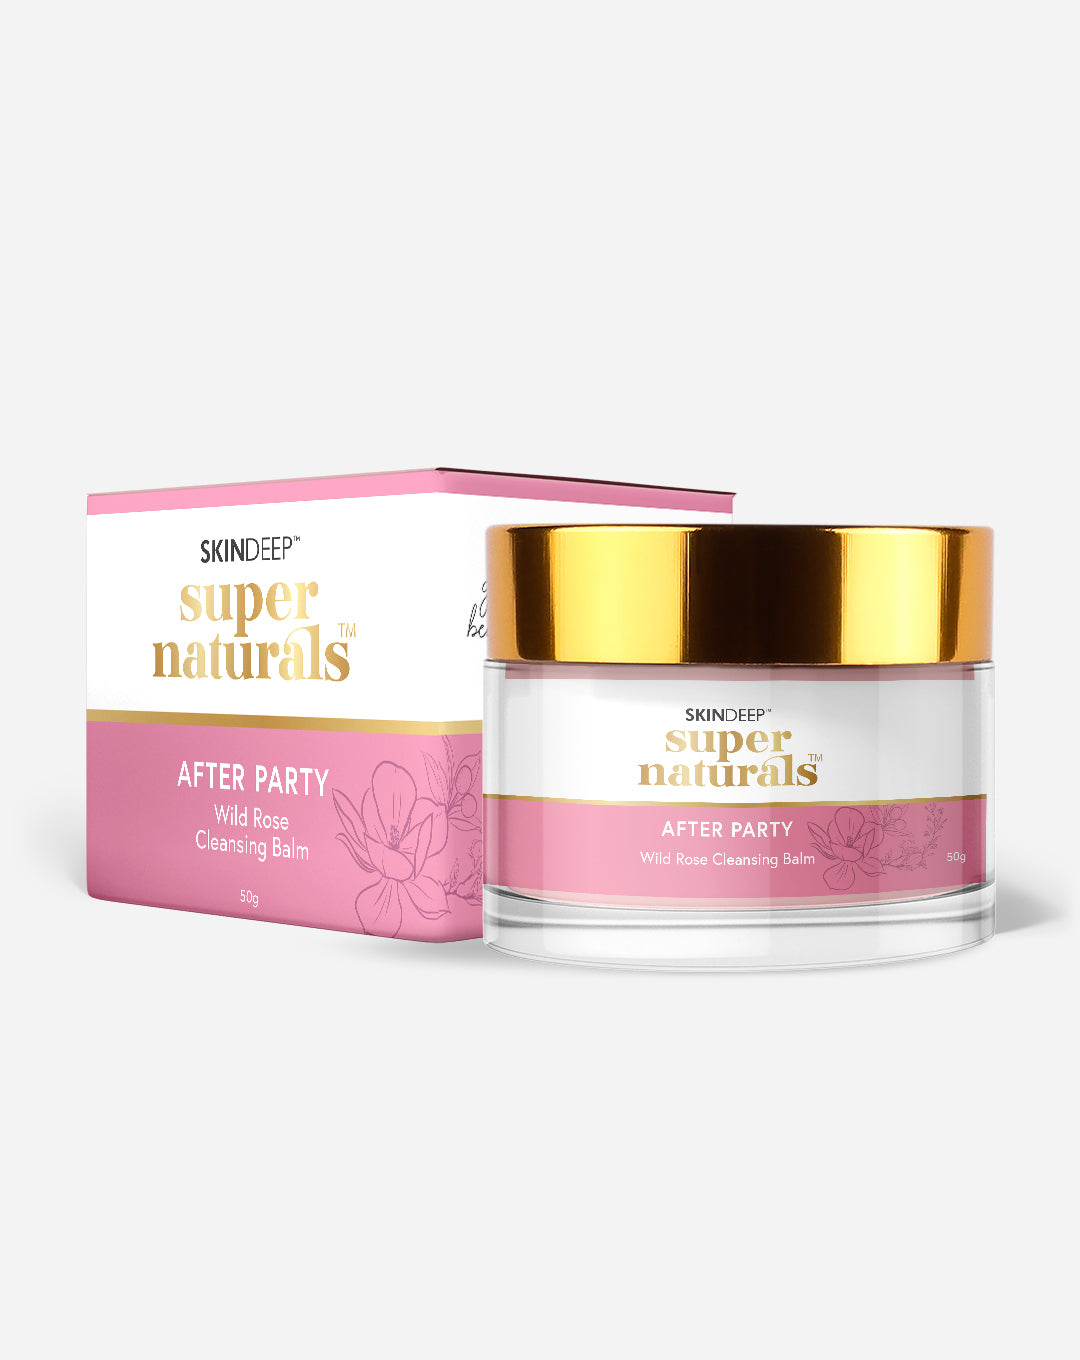 AFTER-PARTY - Wild Rose Cleansing Balm